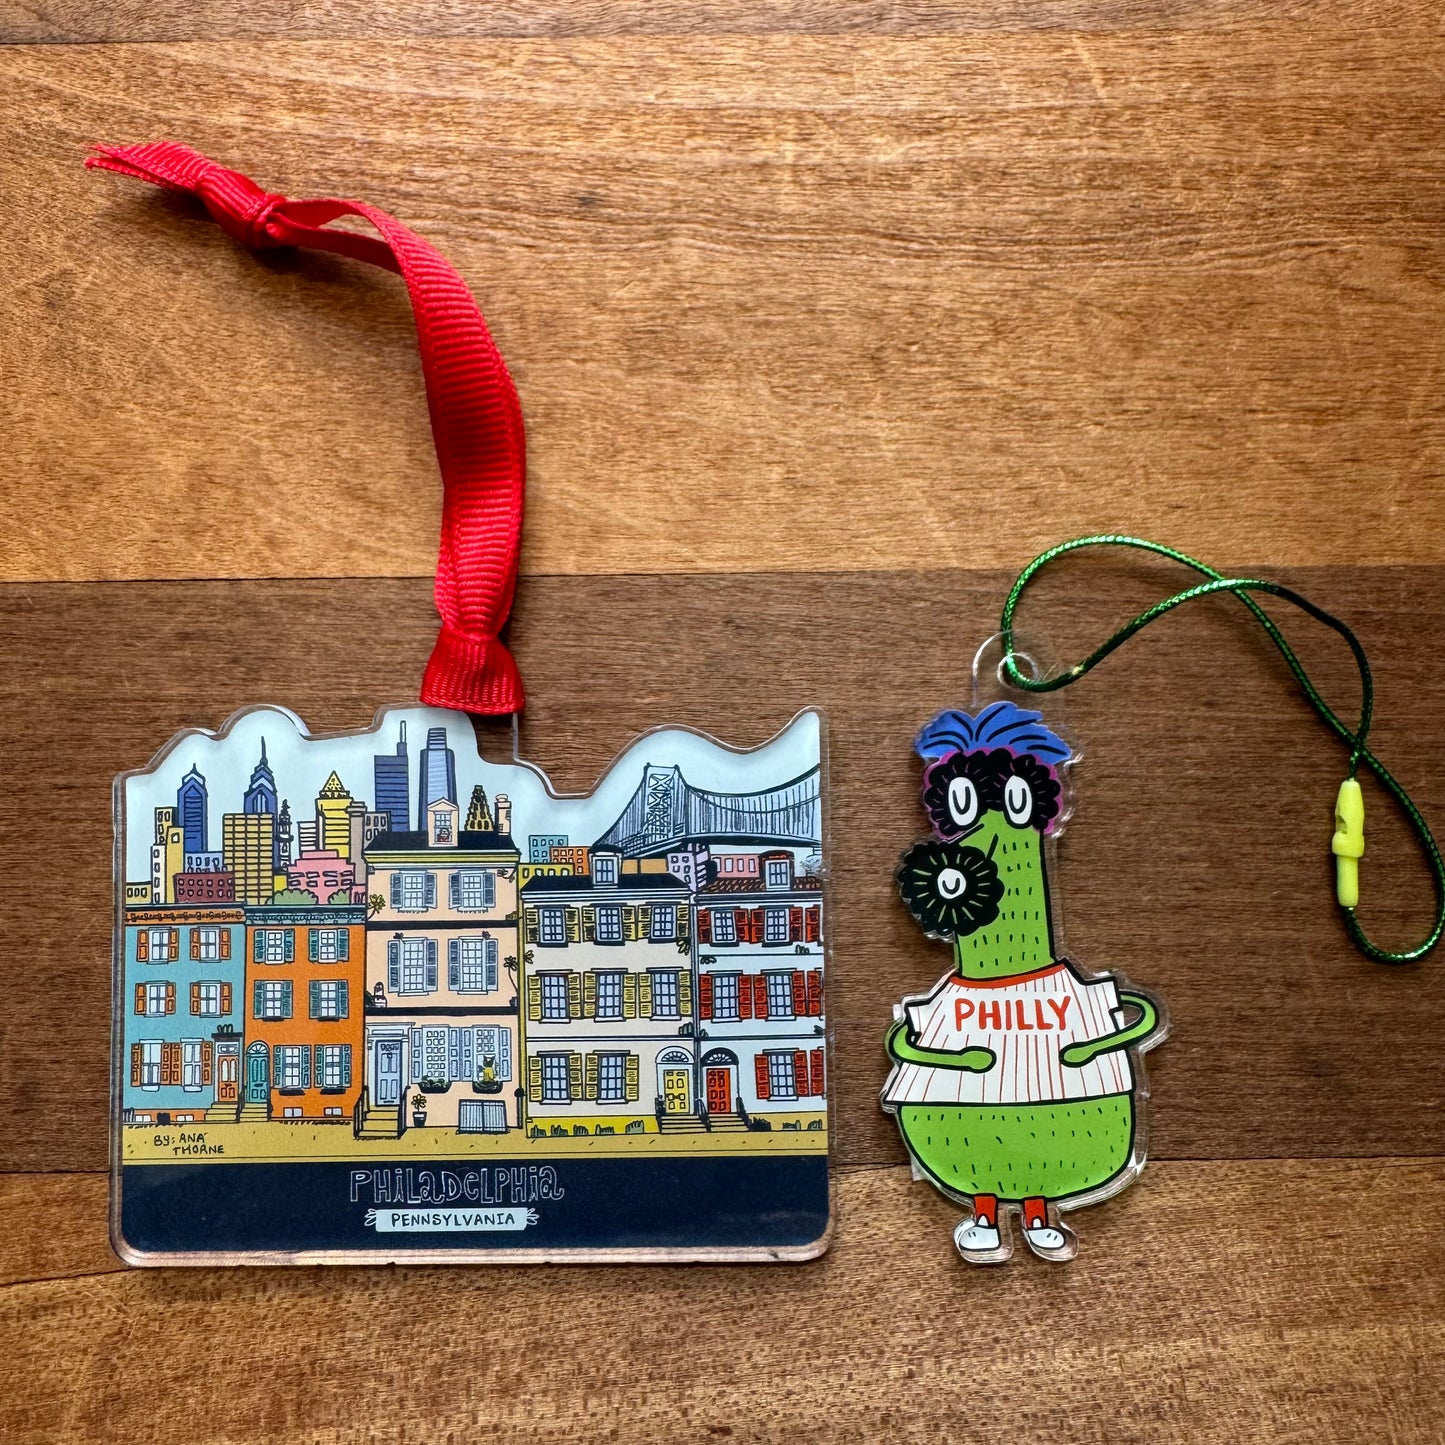 Two Philly Acrylic Ornaments by Ana Thorne rest on a wooden surface: one showcases a vibrant cityscape with famous landmarks, embodying ultimate Philadelphia pride, while the other features a charismatic mascot holding a sign that reads "Philly.